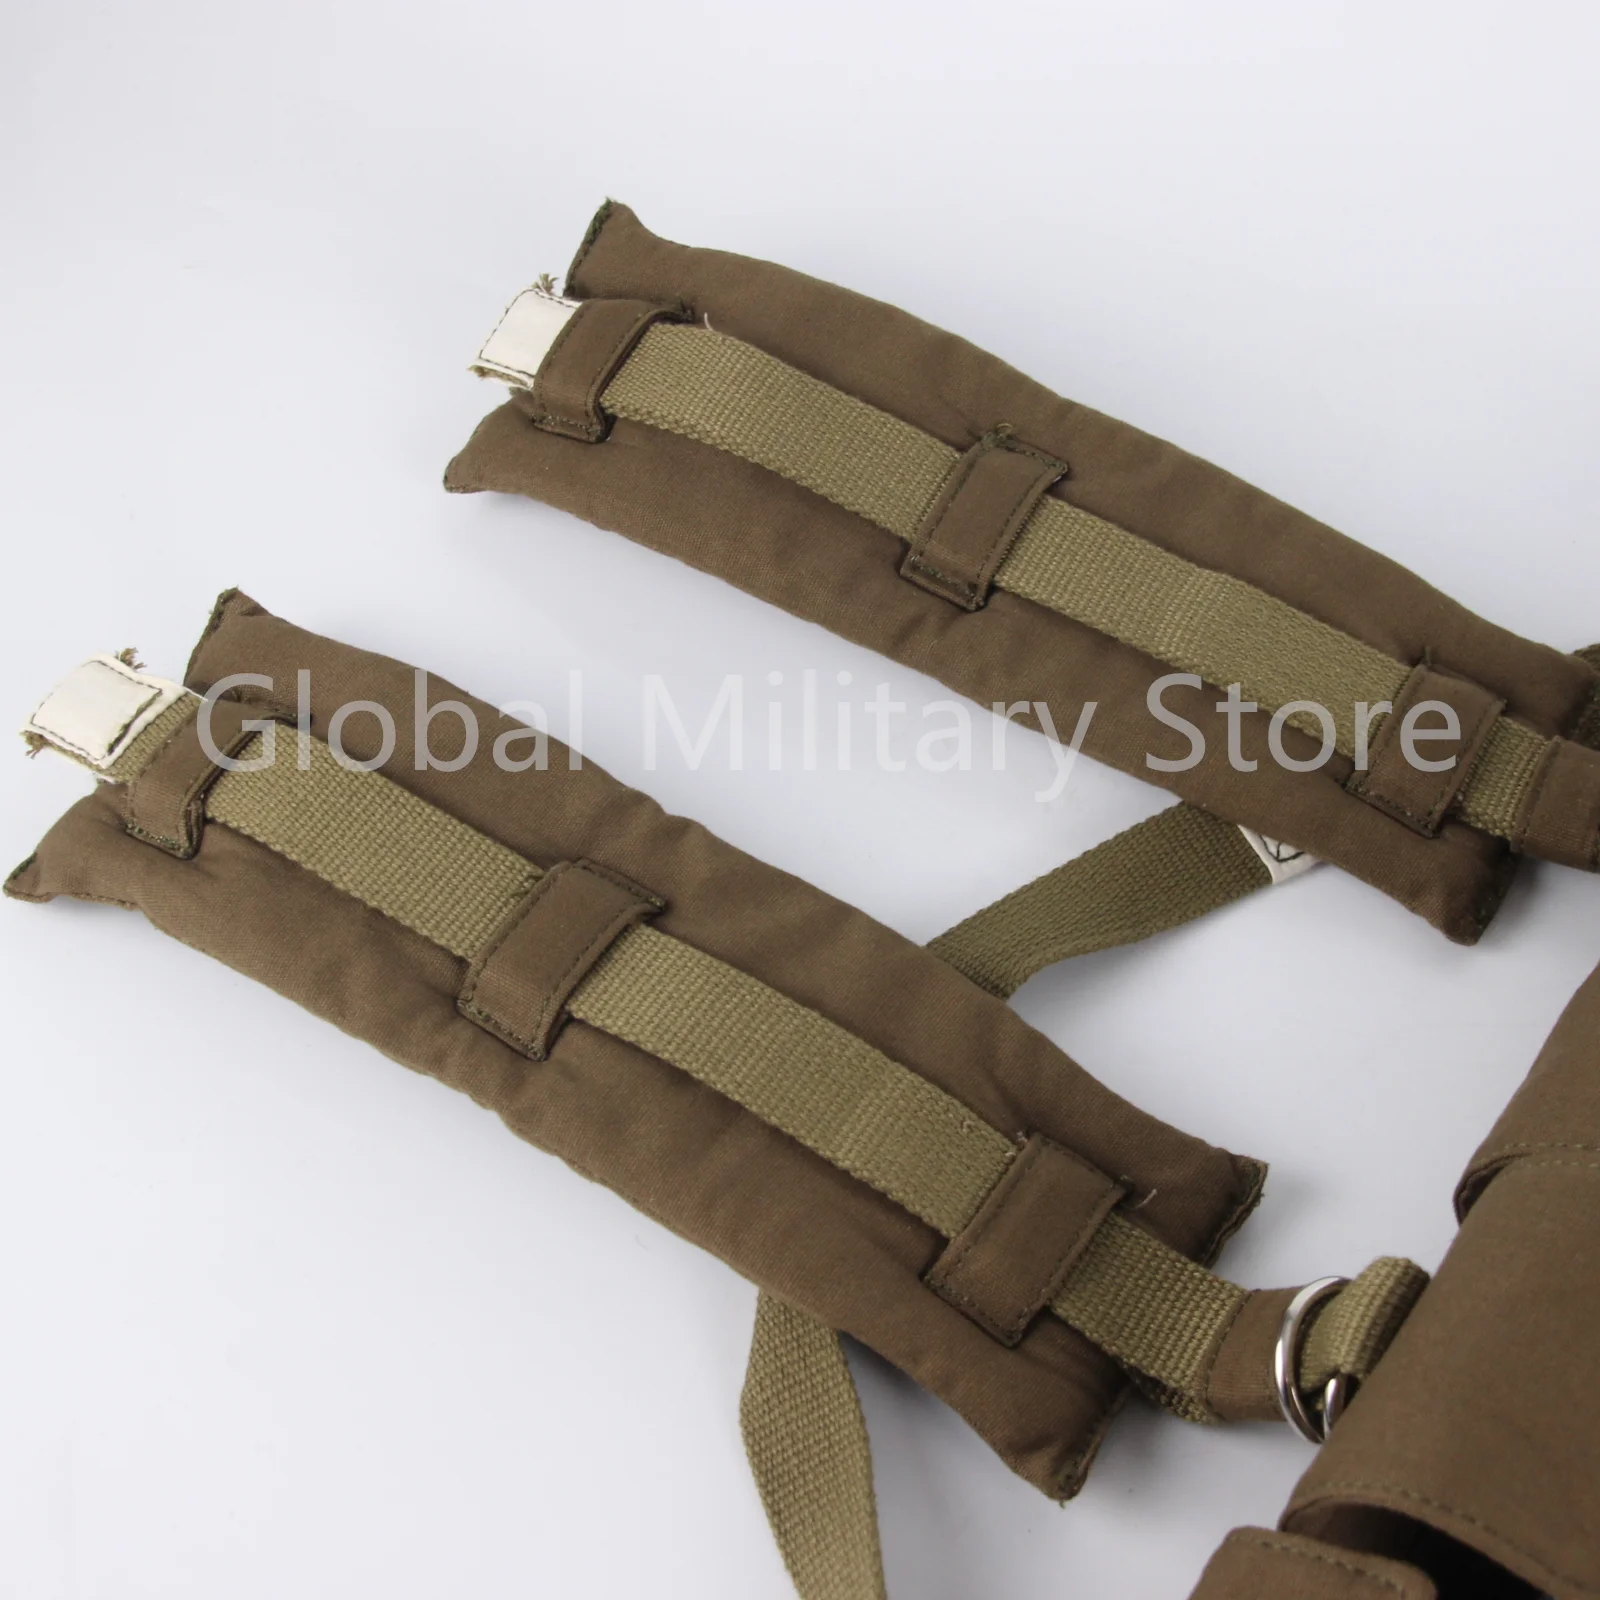 Tactical Vest Soviet R22 Chest Hanging 56 Carrying Gear - AliExpress